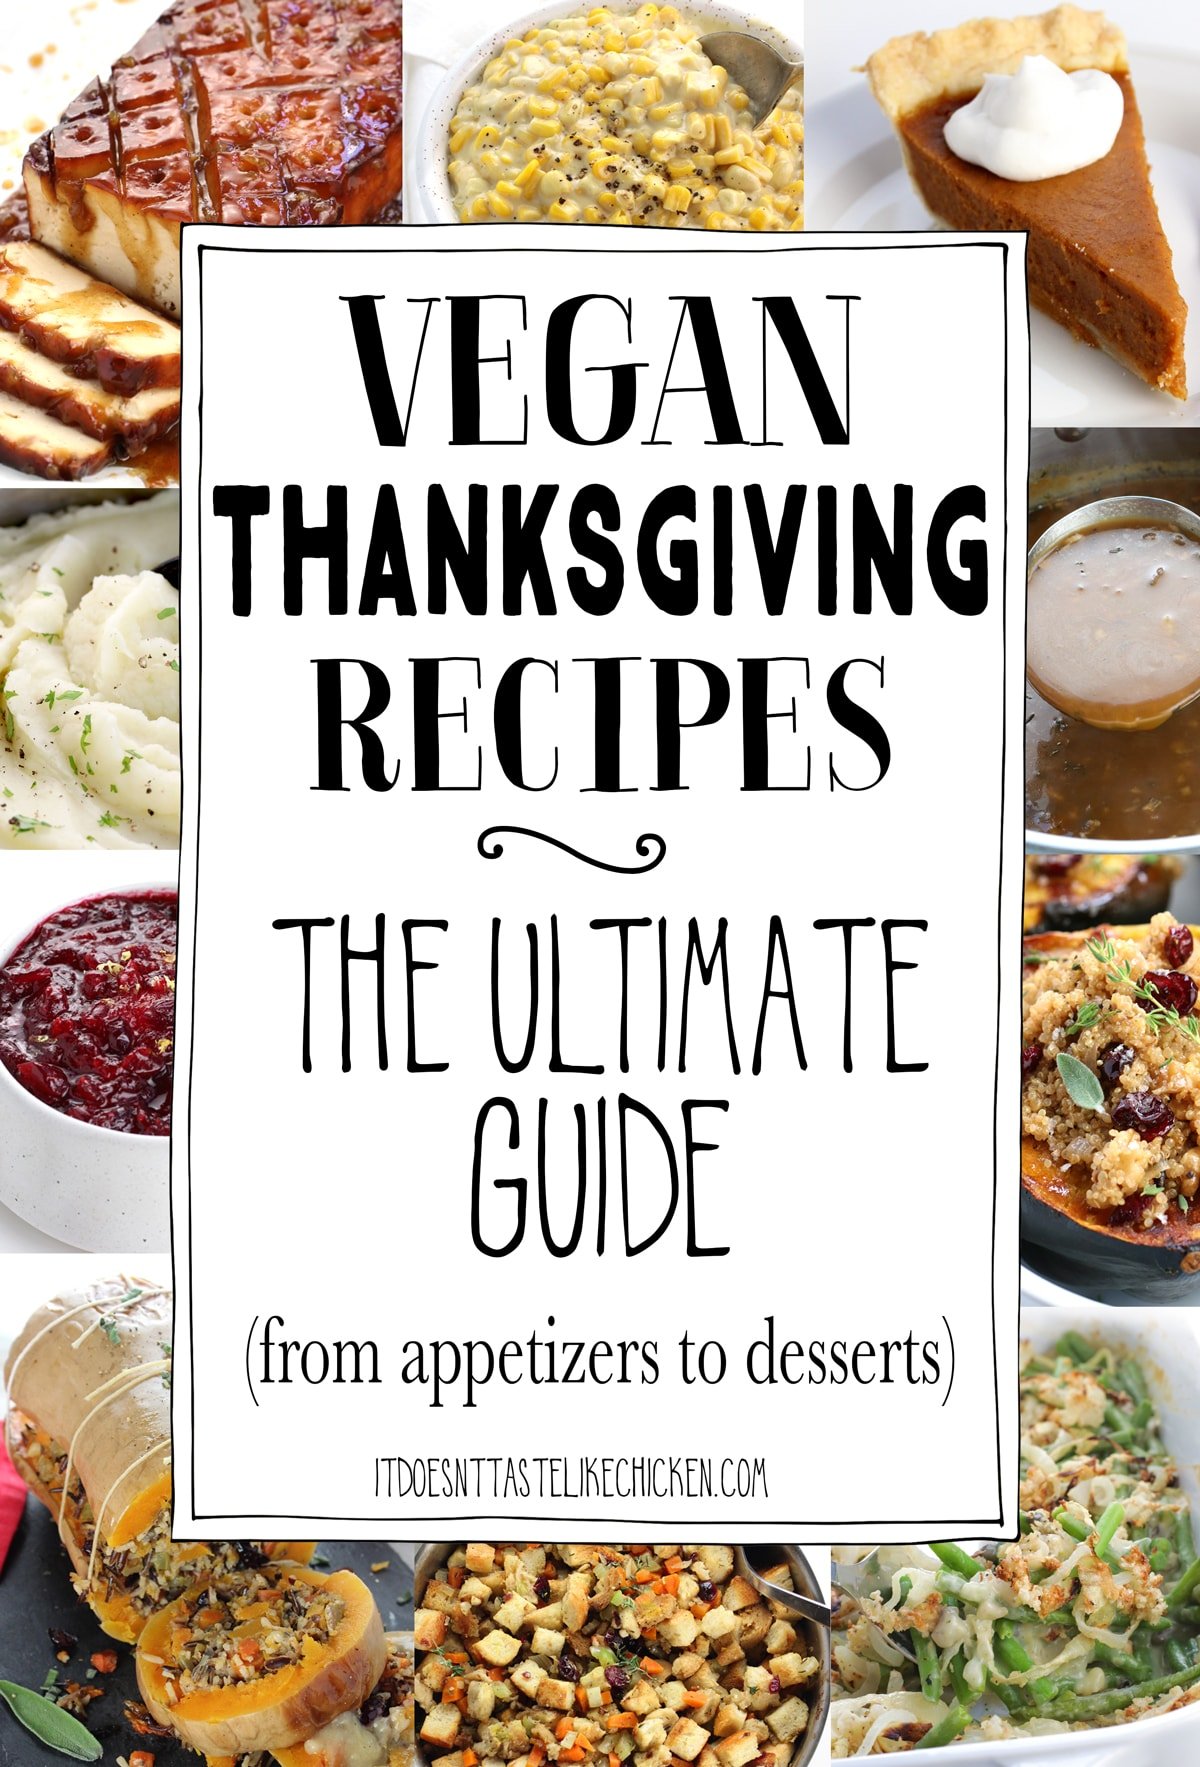 Over 80 vegan Thanksgiving recipes perfect for your feast! Everything from appetizers, sides, main dishes, desserts, and even a few warming drinks. All of the classic recipes are included such as pumpkin pie, cheesy scalloped potatoes, green bean casserole, stuffing, creamed corn, sweet potato casserole, mashed potatoes and gravy, and even holiday roasts all made totally vegan. It's the ultimate guide! #itdoesnttastelikechicken #thanksgiving #veganrecipes